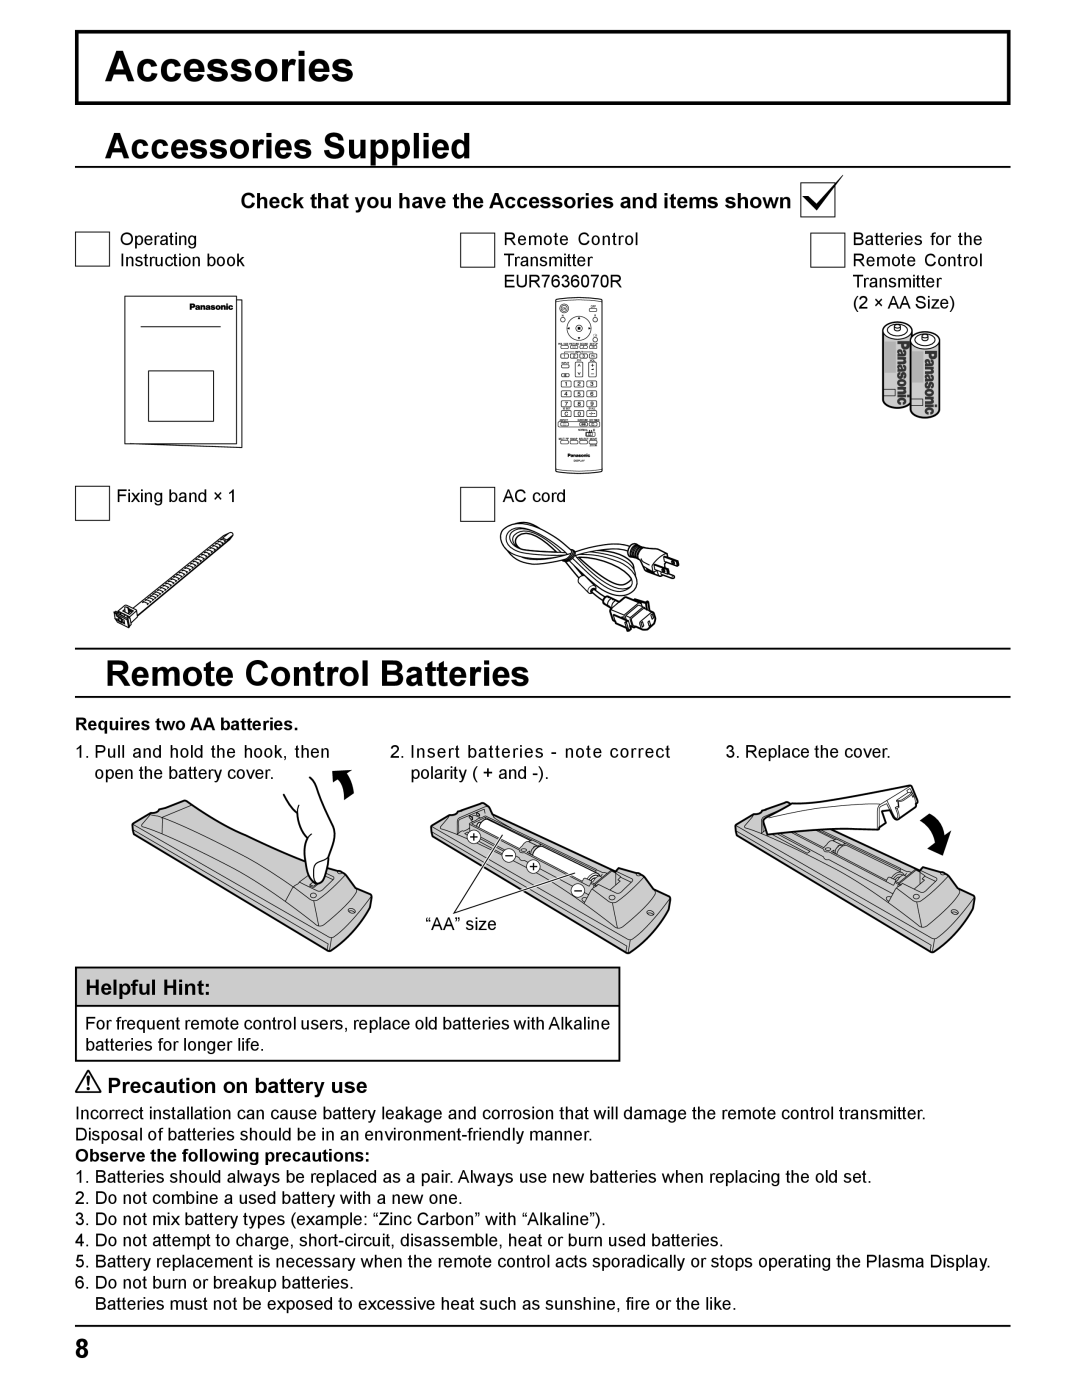 Panasonic TH-65PF11UK manual Accessories Supplied, Remote Control Batteries, Helpful Hint, Precaution on battery use 